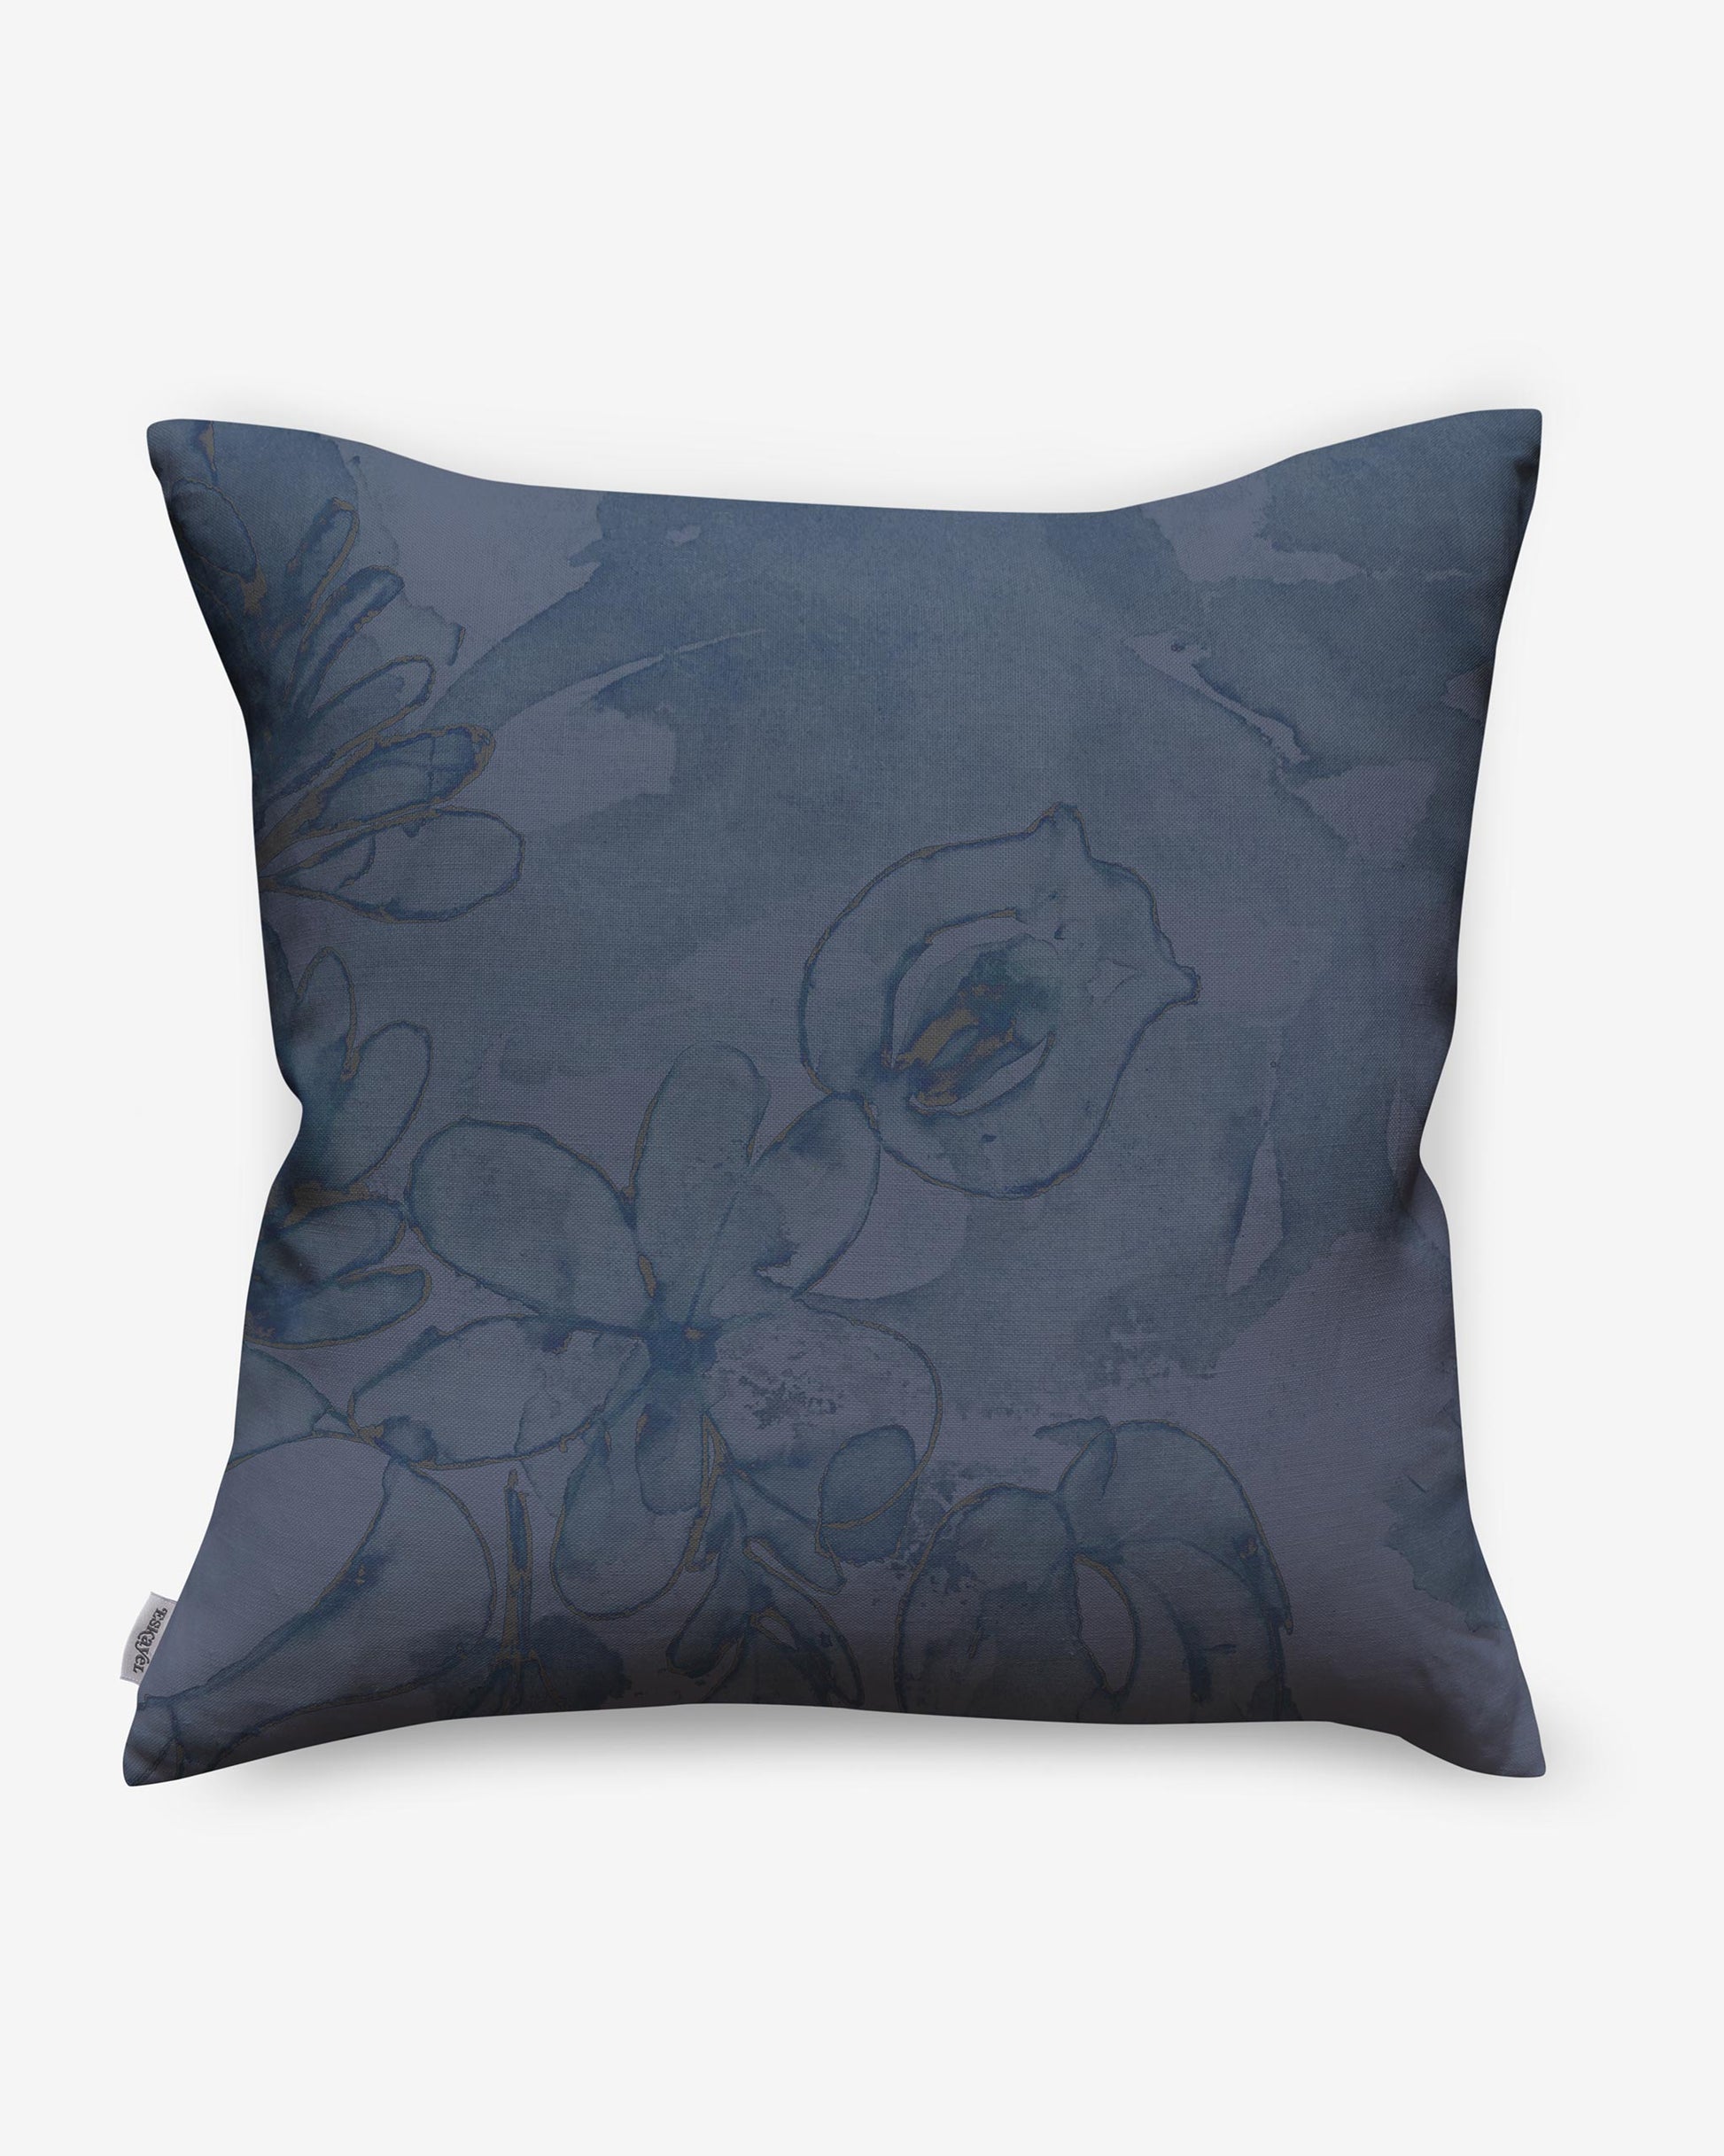 A Belize Blooms Pillow Night Fog with a blue floral design made of luxury fabric